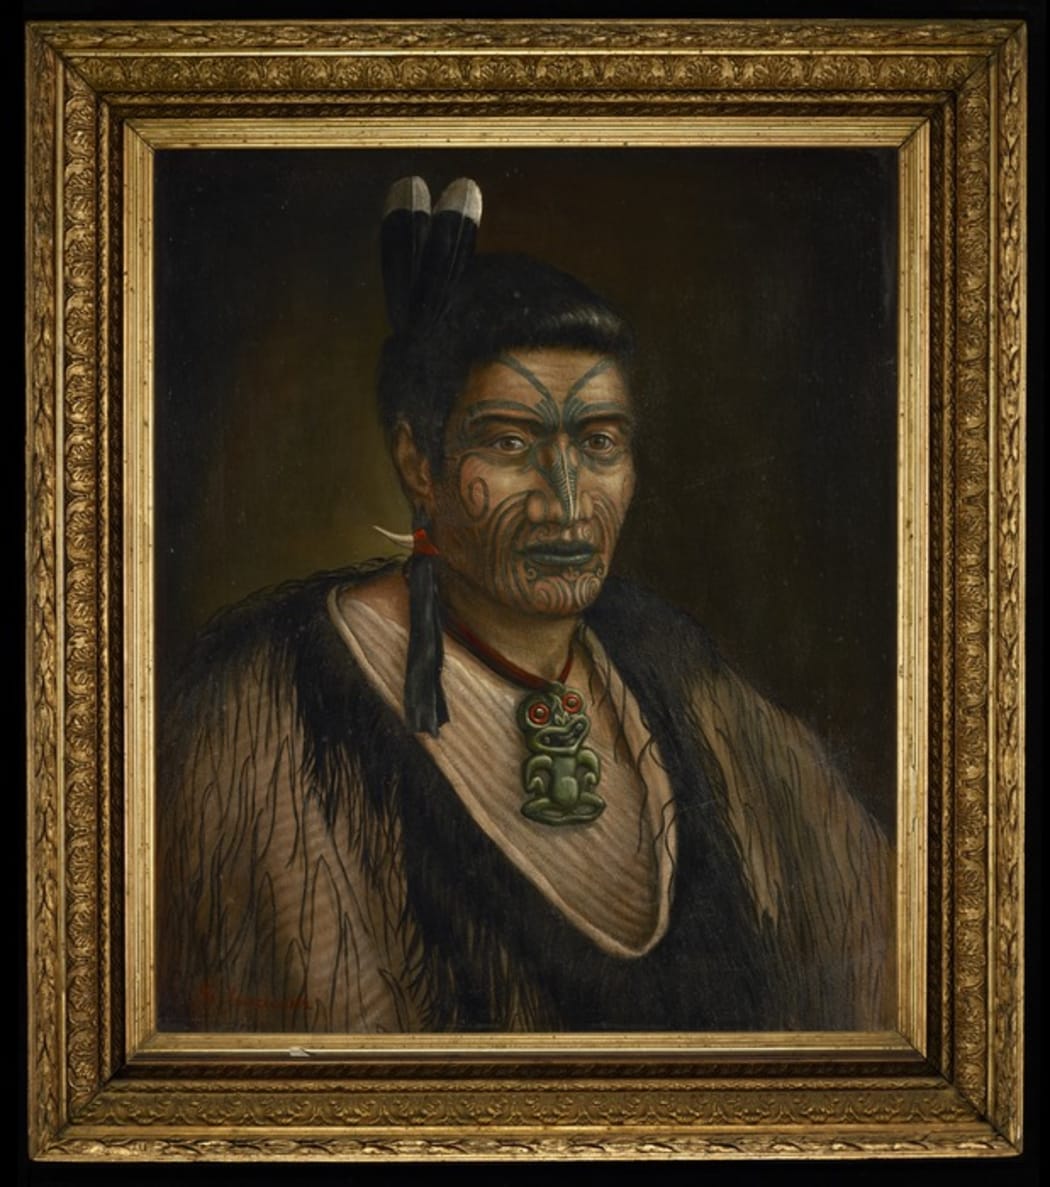 Portrait of a Maori man named as as Hoani or Hamiora Maioha, and signed G.Lindauer, but revealed to be a fake